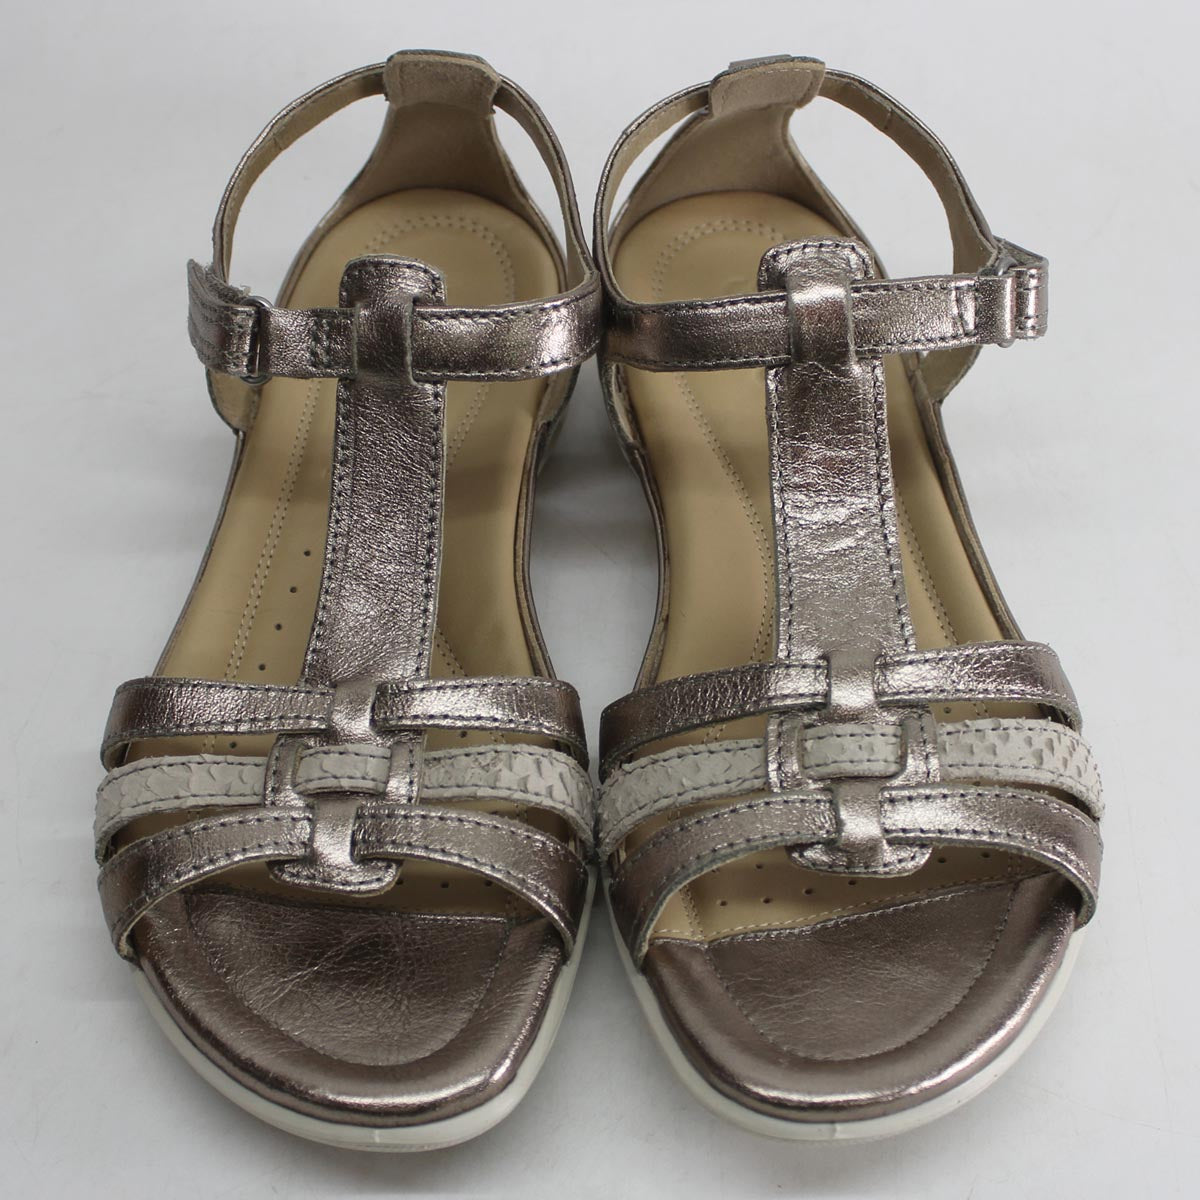 Ecco Flash Warm Grey Metallic Womens Leather T-Strap Casual Ankle Strap Sandals - UK 5-5.5